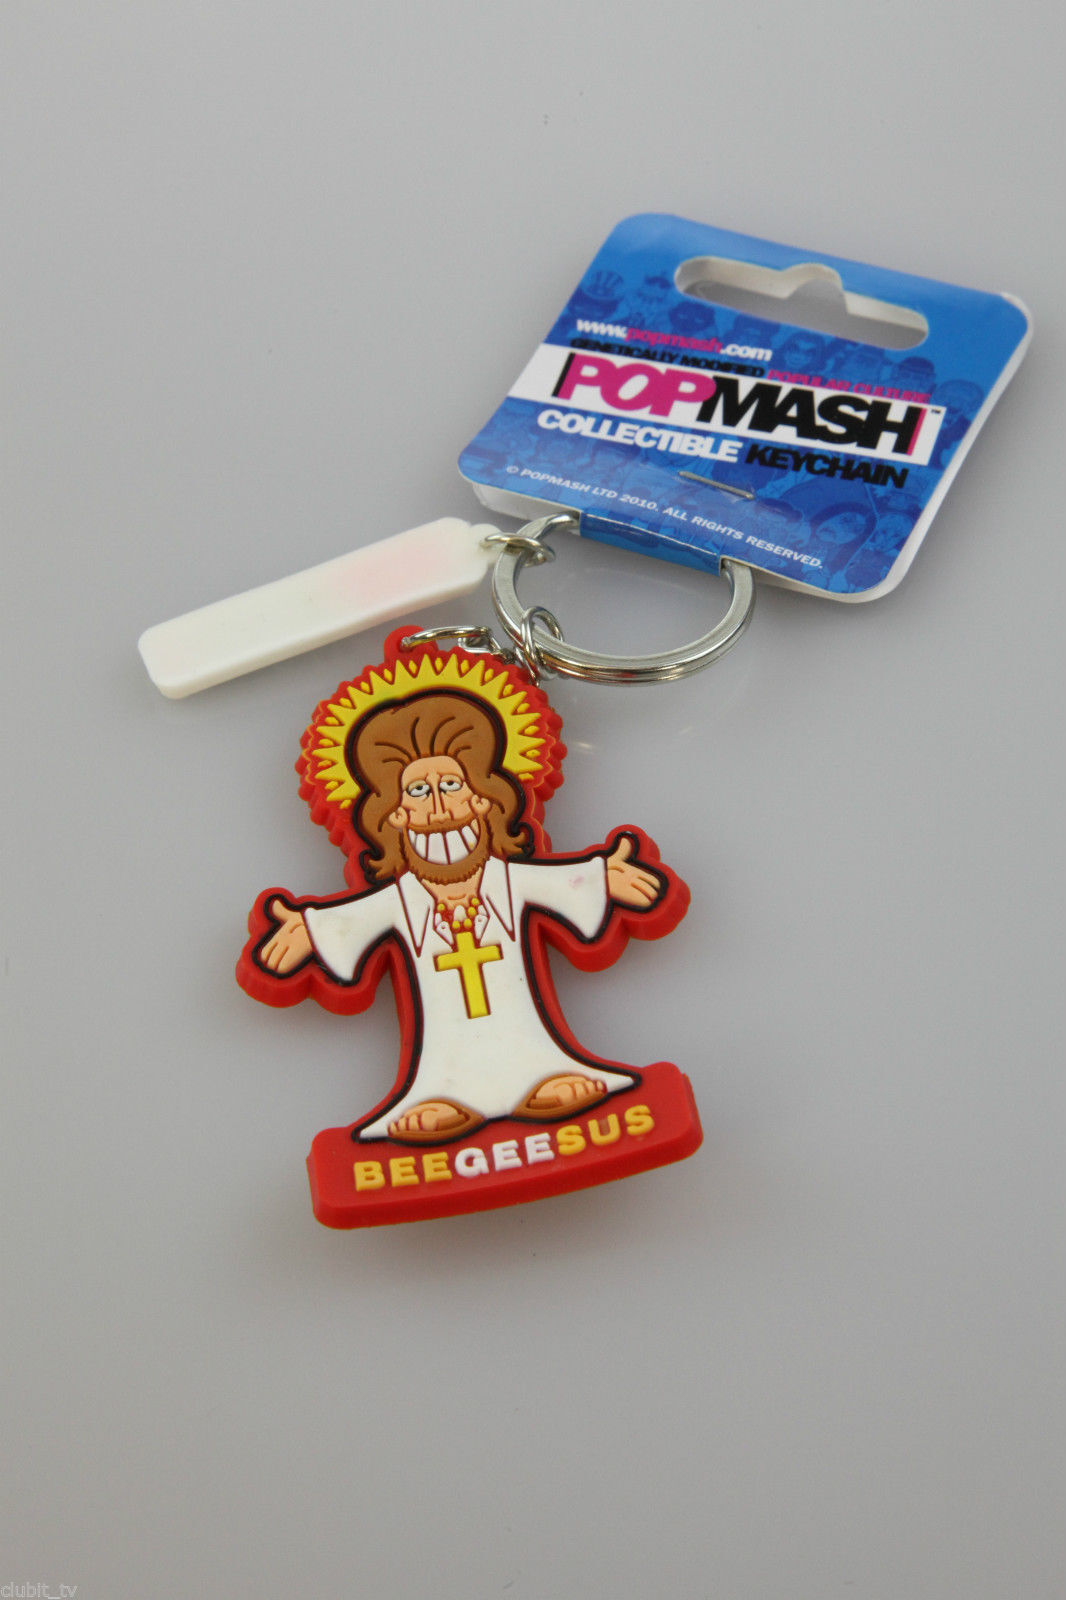 Popmash Collectible Keychain PVC Novelty Funny Gift Keyring NEW - BEEGEESUS